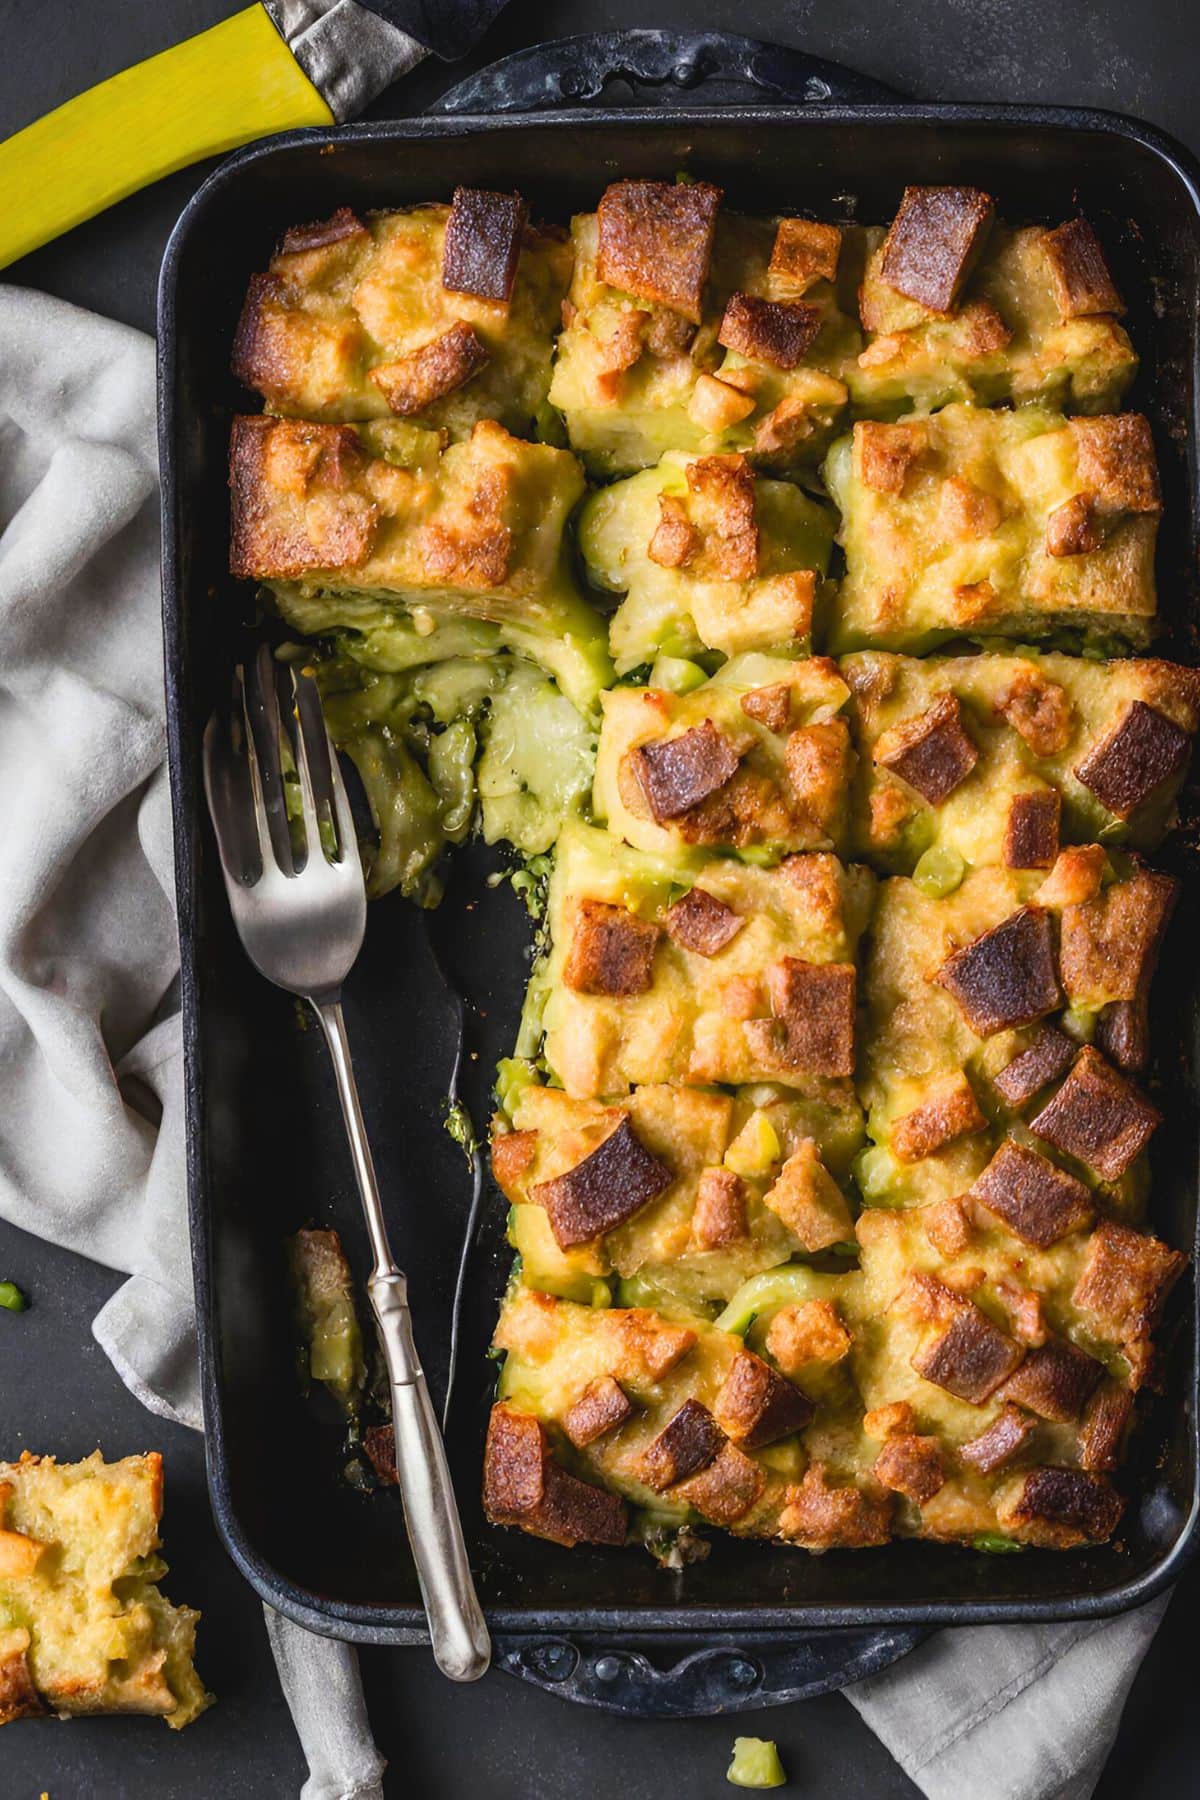 Savory Bread pudding in a baking dish 